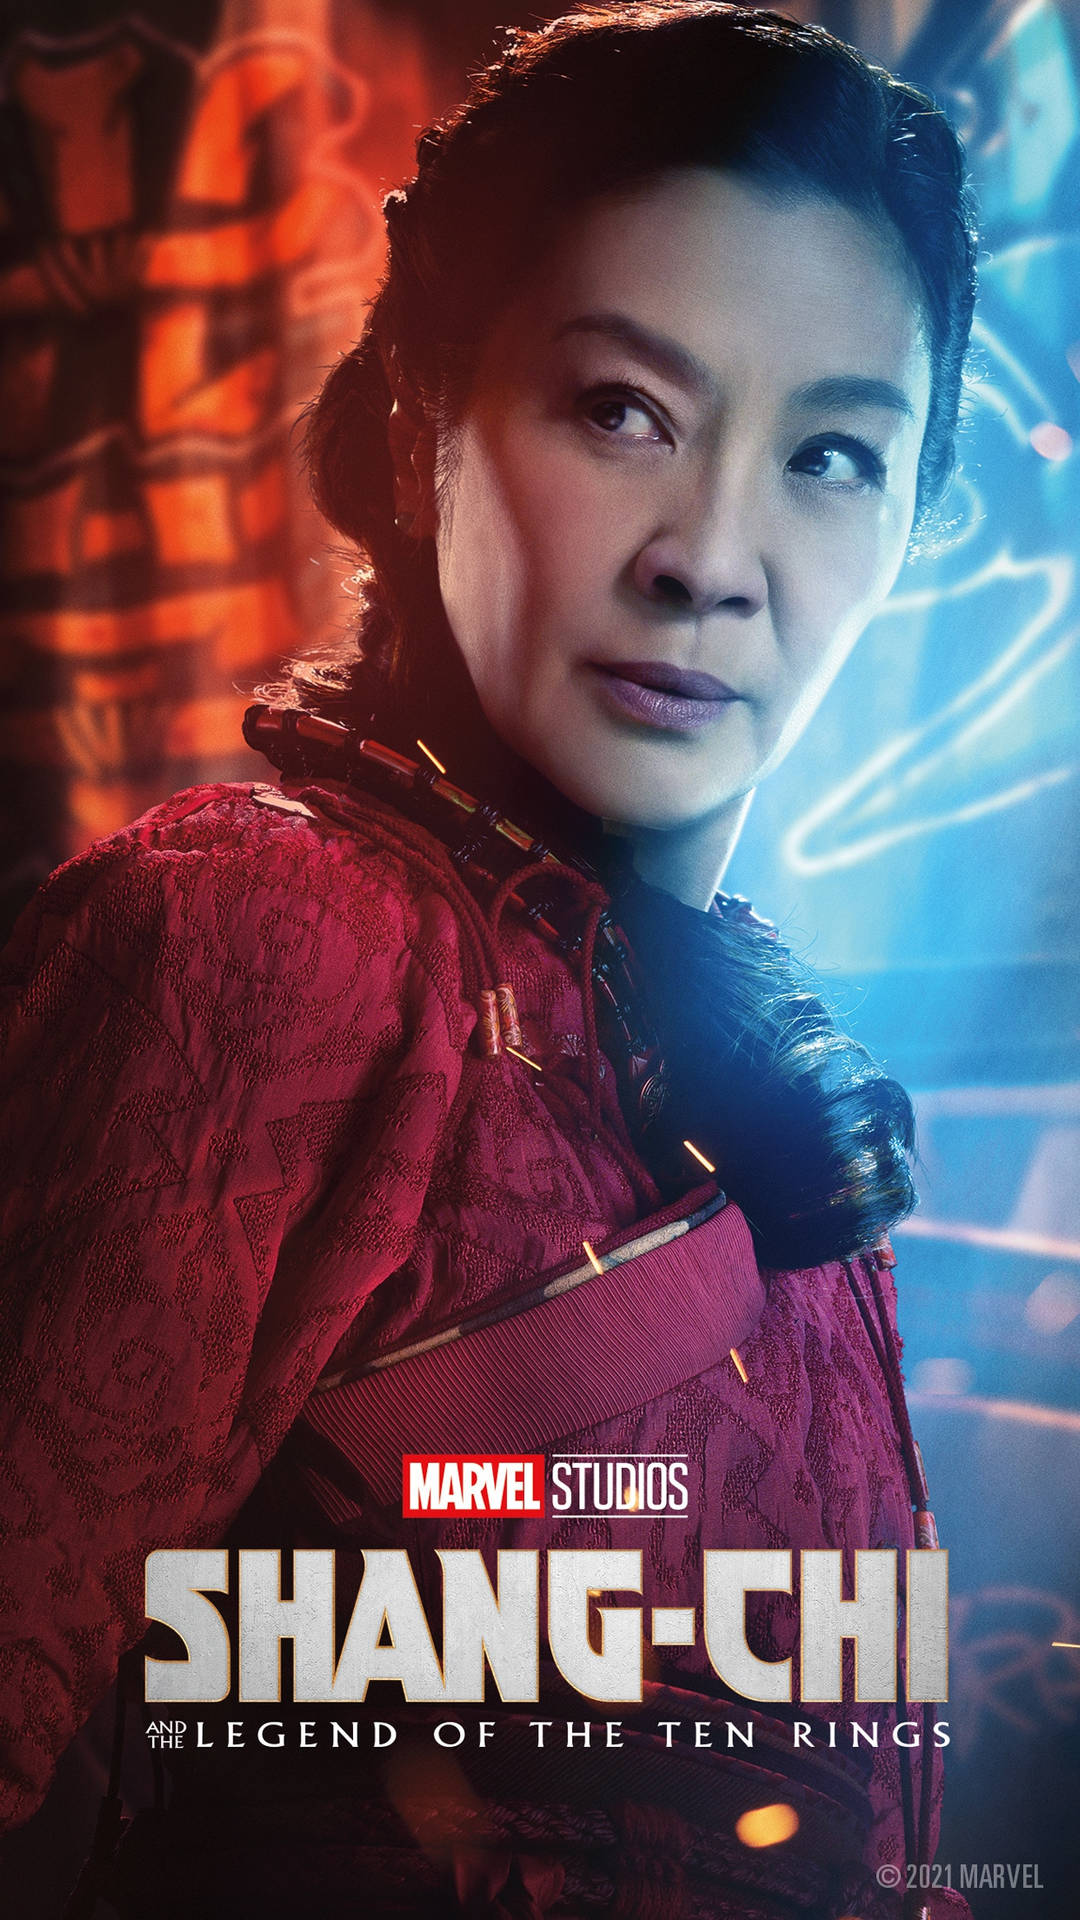 Shang-chi Michelle Yeoh Poster Background